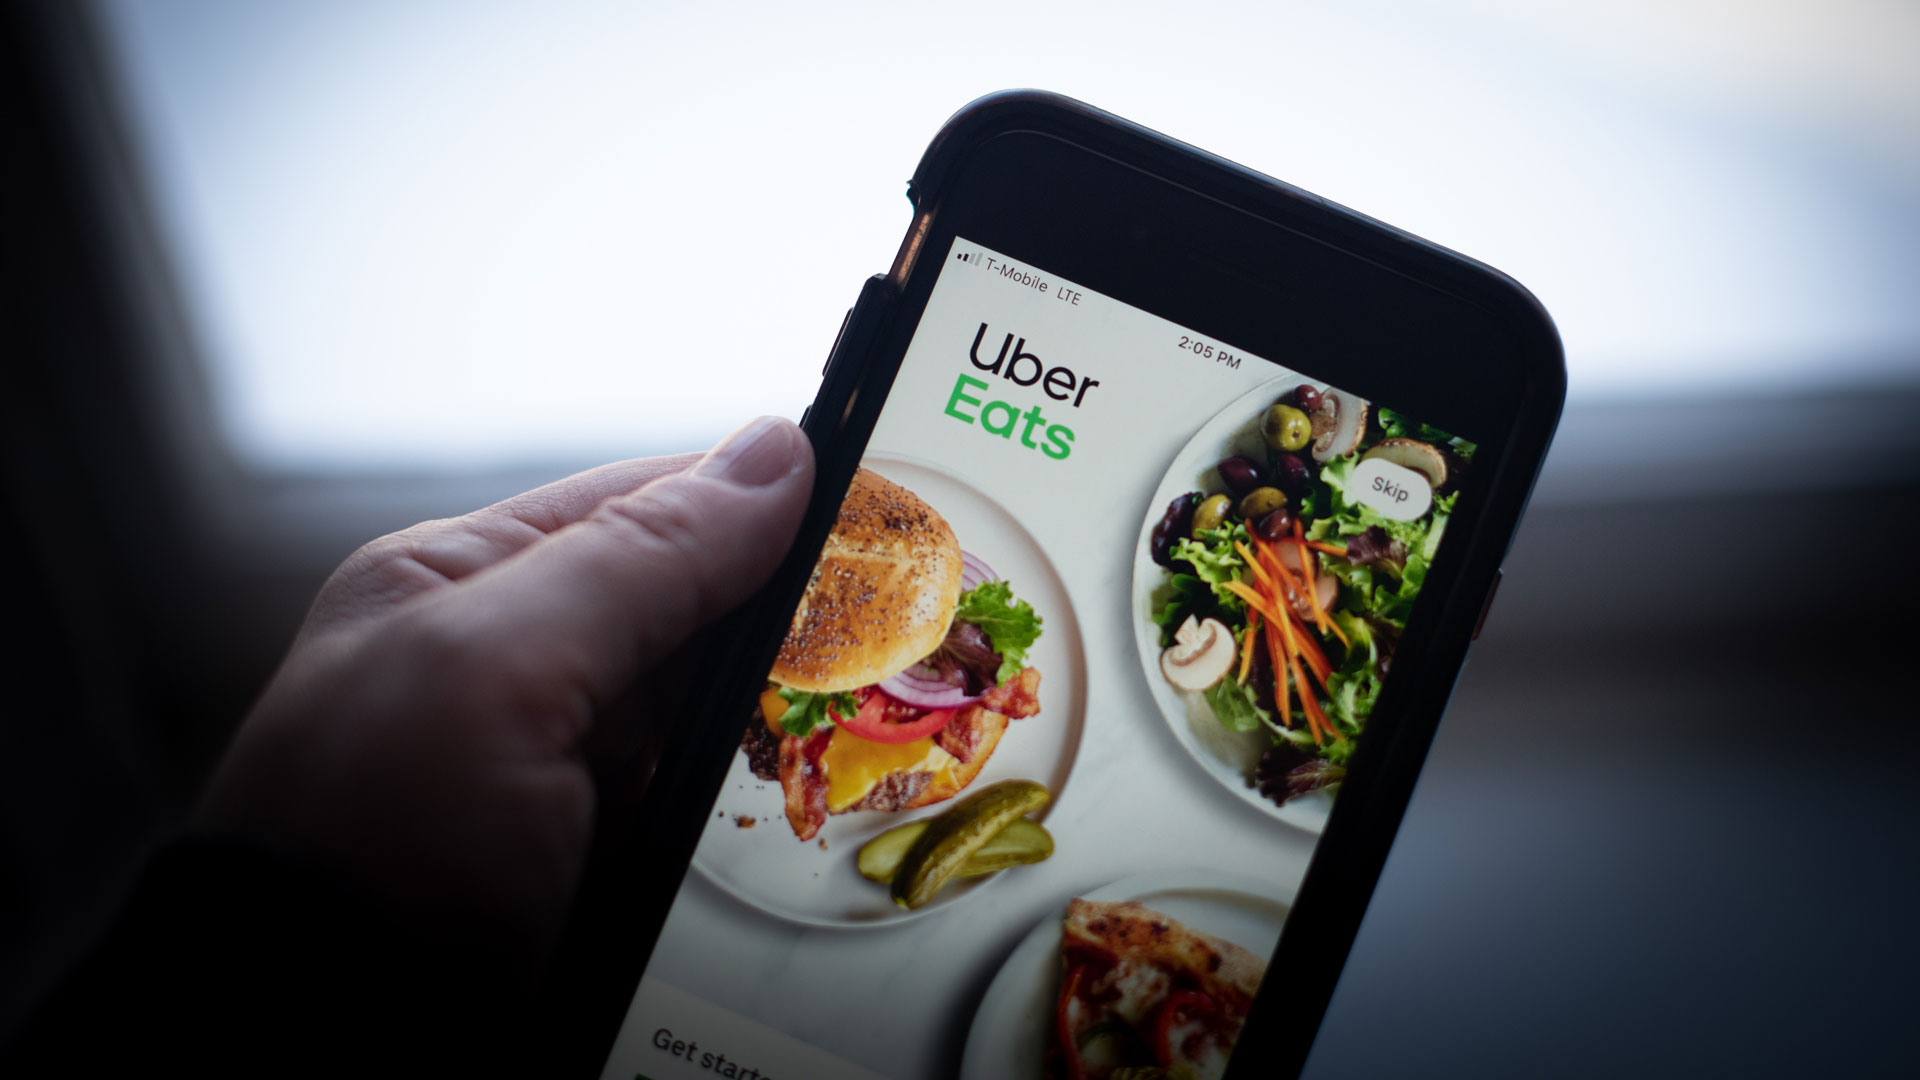 Uber Eats set to launch ‘gamechanger’ TikTok-like feature to platform – but some fans worry it comes at a cost [Video]